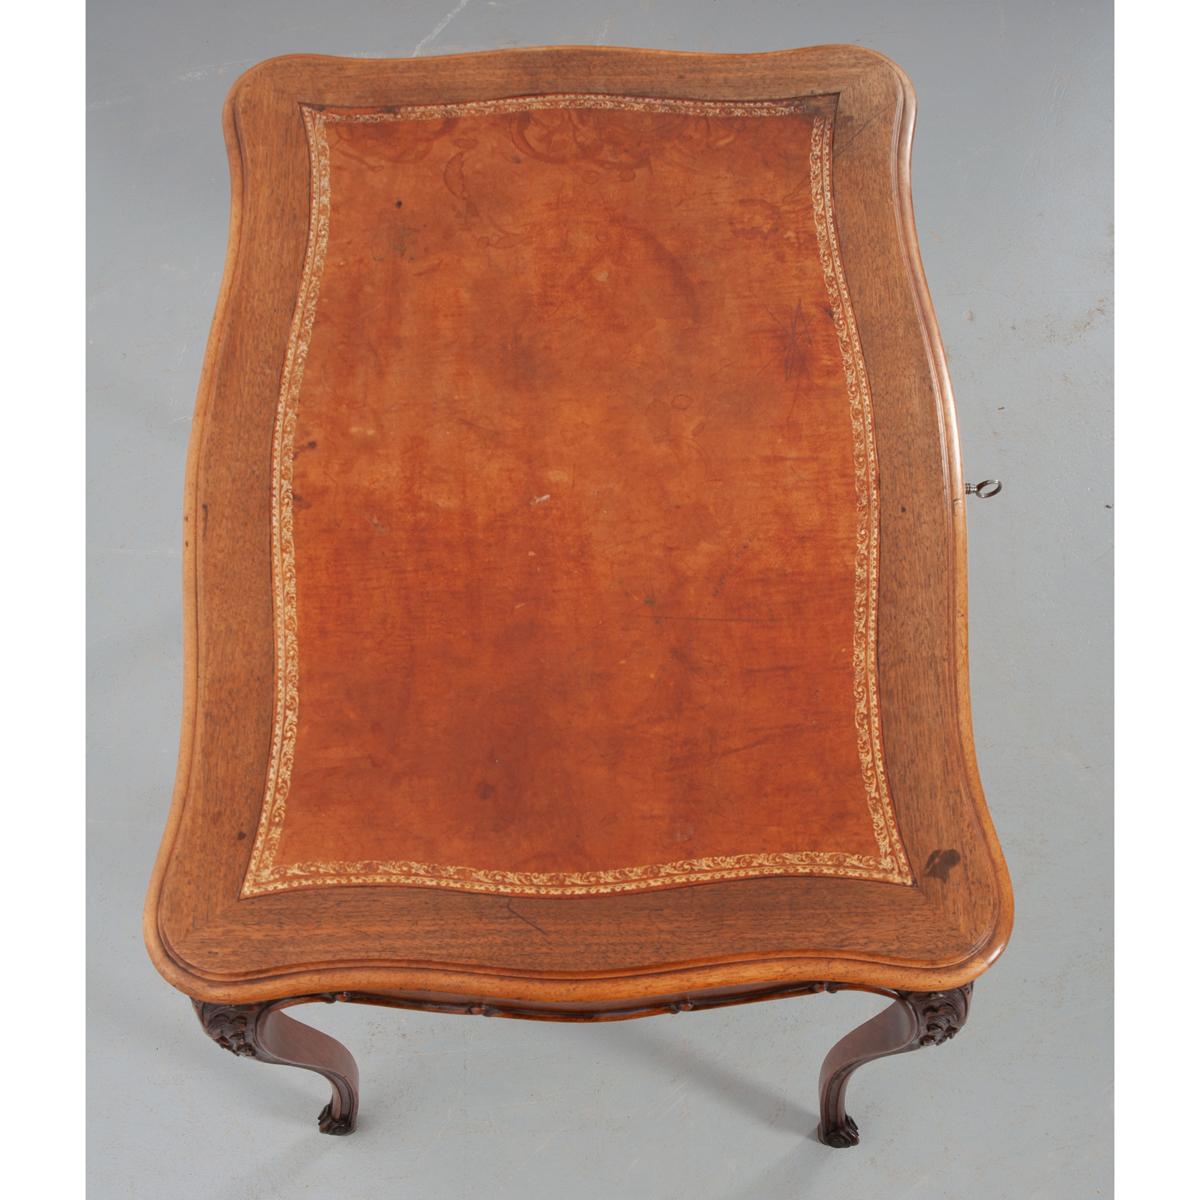 A fantastic mahogany desk that could serve as an occasional table or a small writing desk. This beautiful antique features exceptional decorative carvings, all done by hand, that are found on antiques influenced by Louis XV. The writing surface has